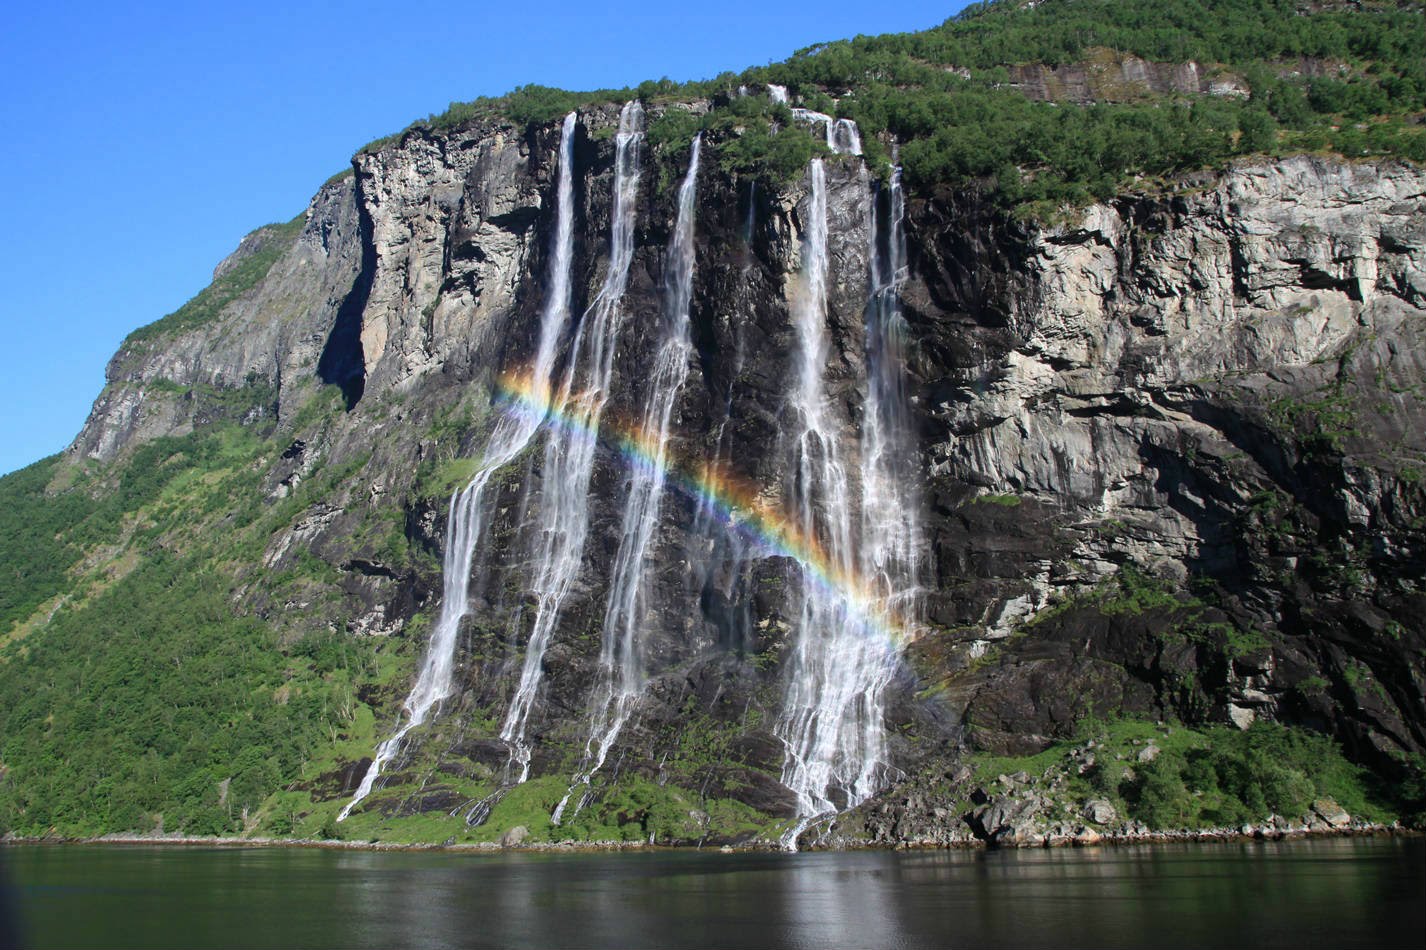 Amazing Seven Sisters Waterfall, Norway Pictures & Backgrounds